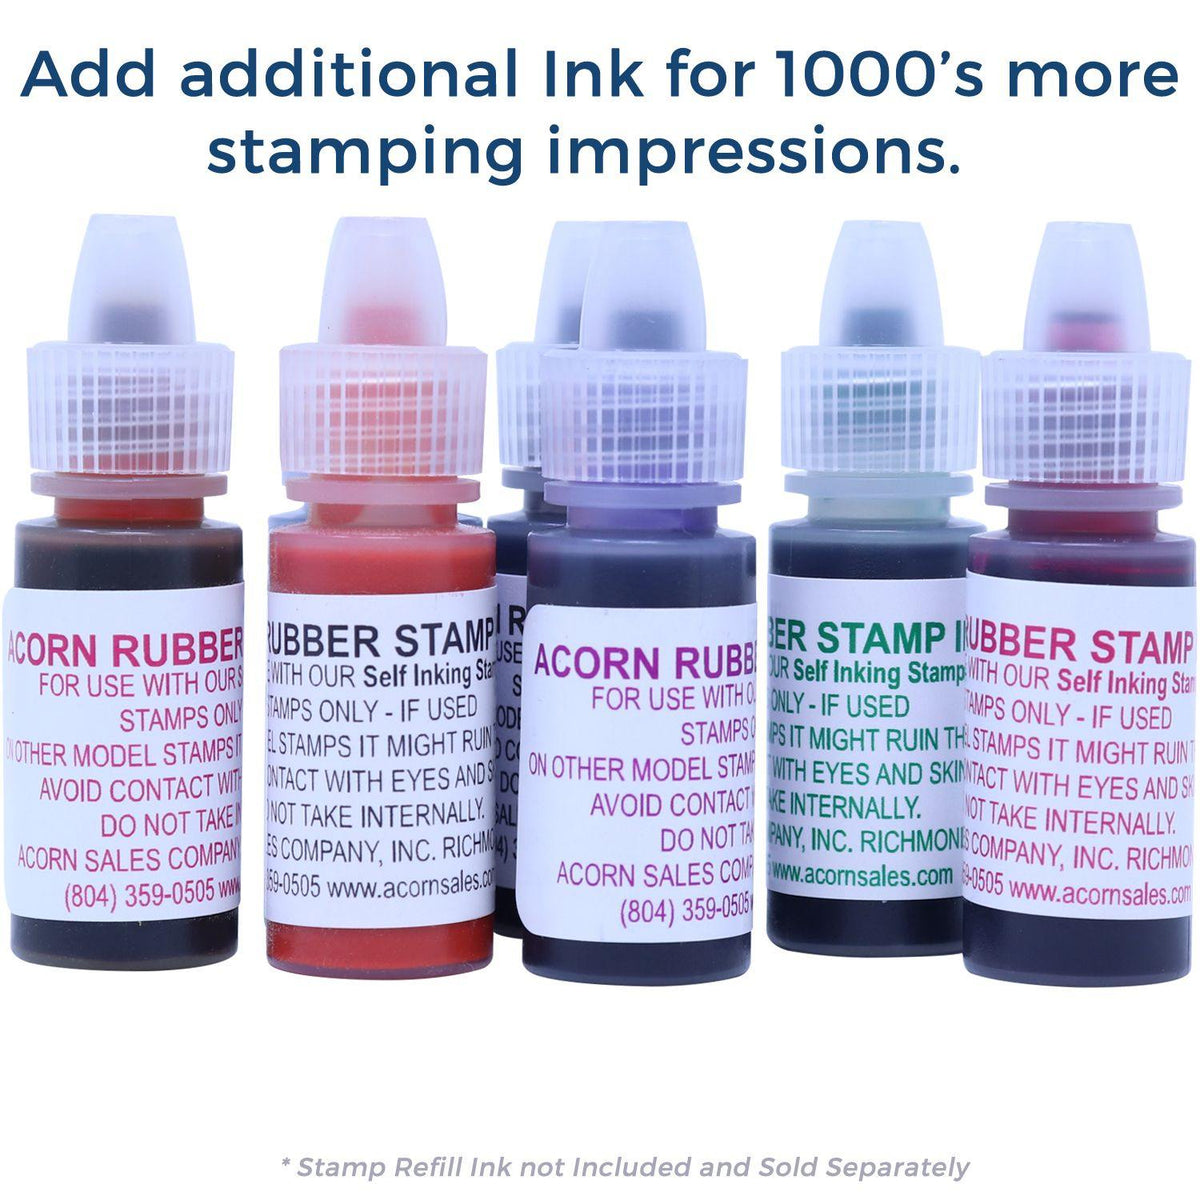 Refill Inks for Large Pre-Inked File with Envelope Stamp Available